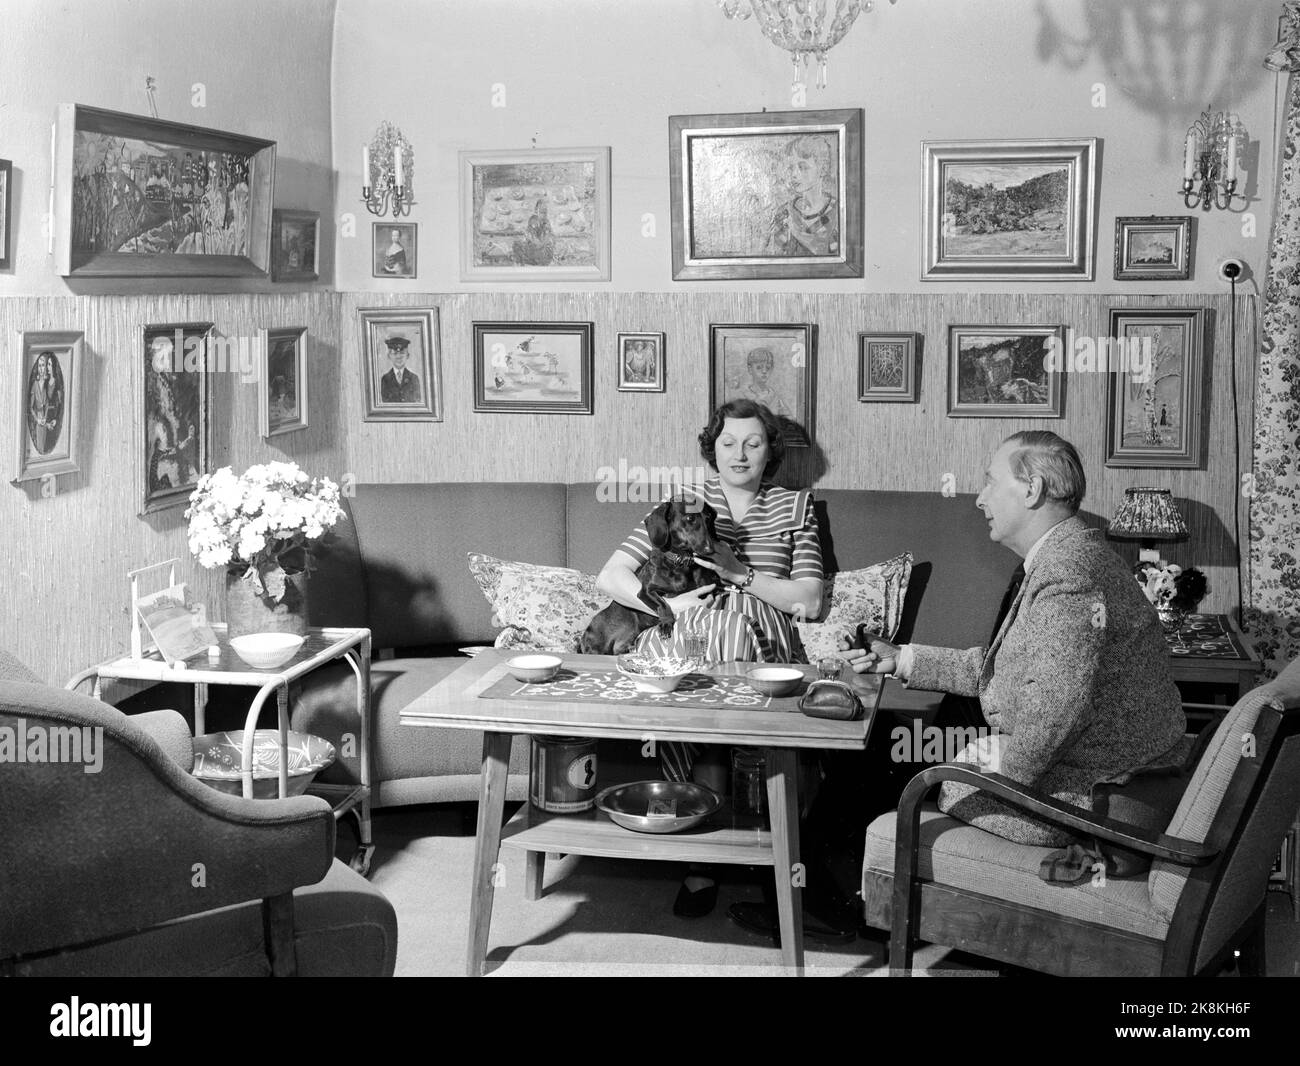 Oslo 195012. The artist Per Krohg has been given the honorable assignment to take care of the interior and artistic design of the security council's meeting room in the UN. The Ministry of Foreign Affairs has allocated money for the work that is a gift from Norway. Kristian Krohg with his wife Ragnhild and the dog Selsom at home in the living room. Photo: Current / NTB Stock Photo